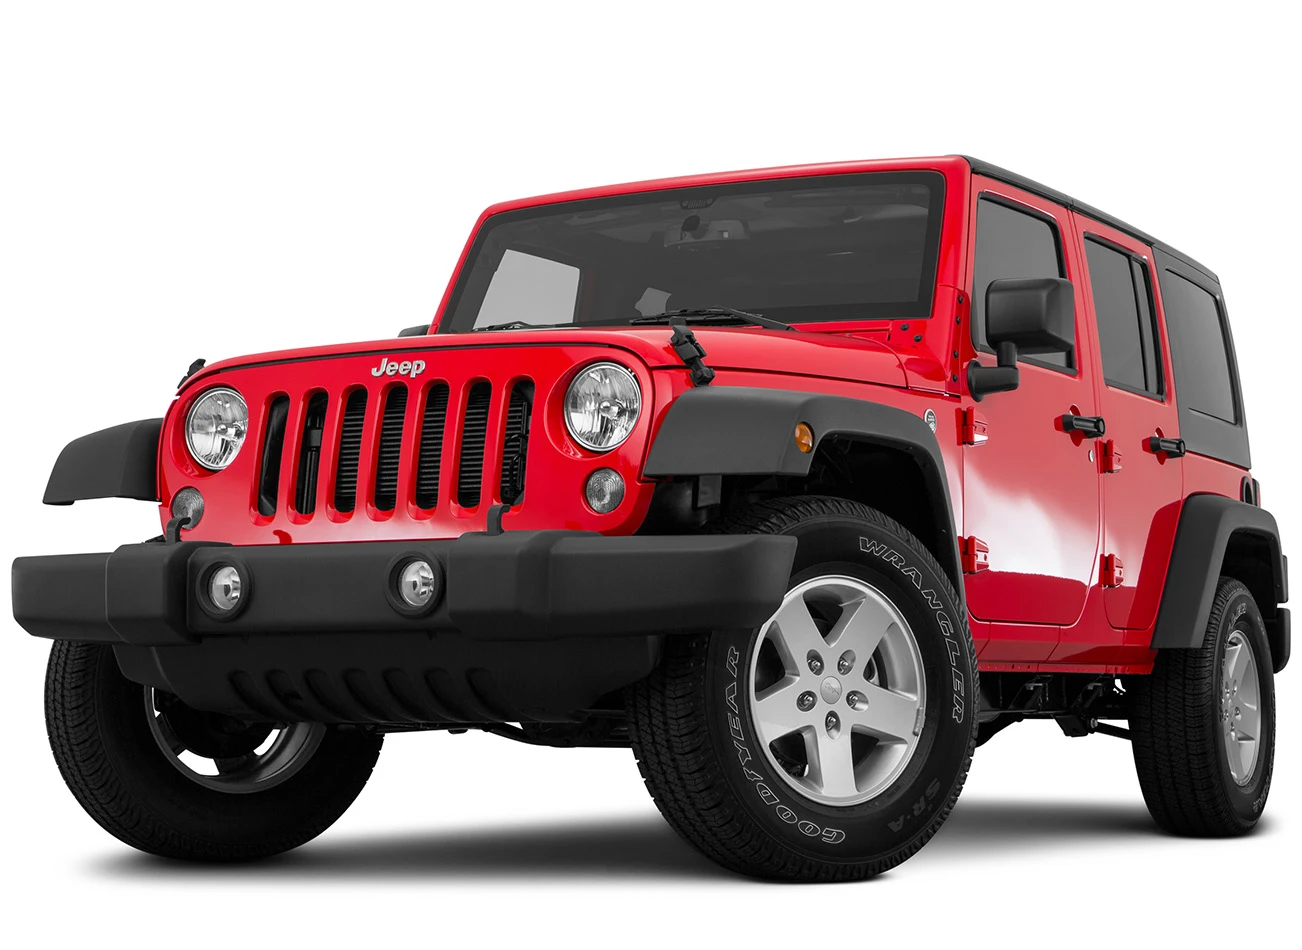 2016 Jeep Wrangler: Front exterior view of vehicle | CarMax